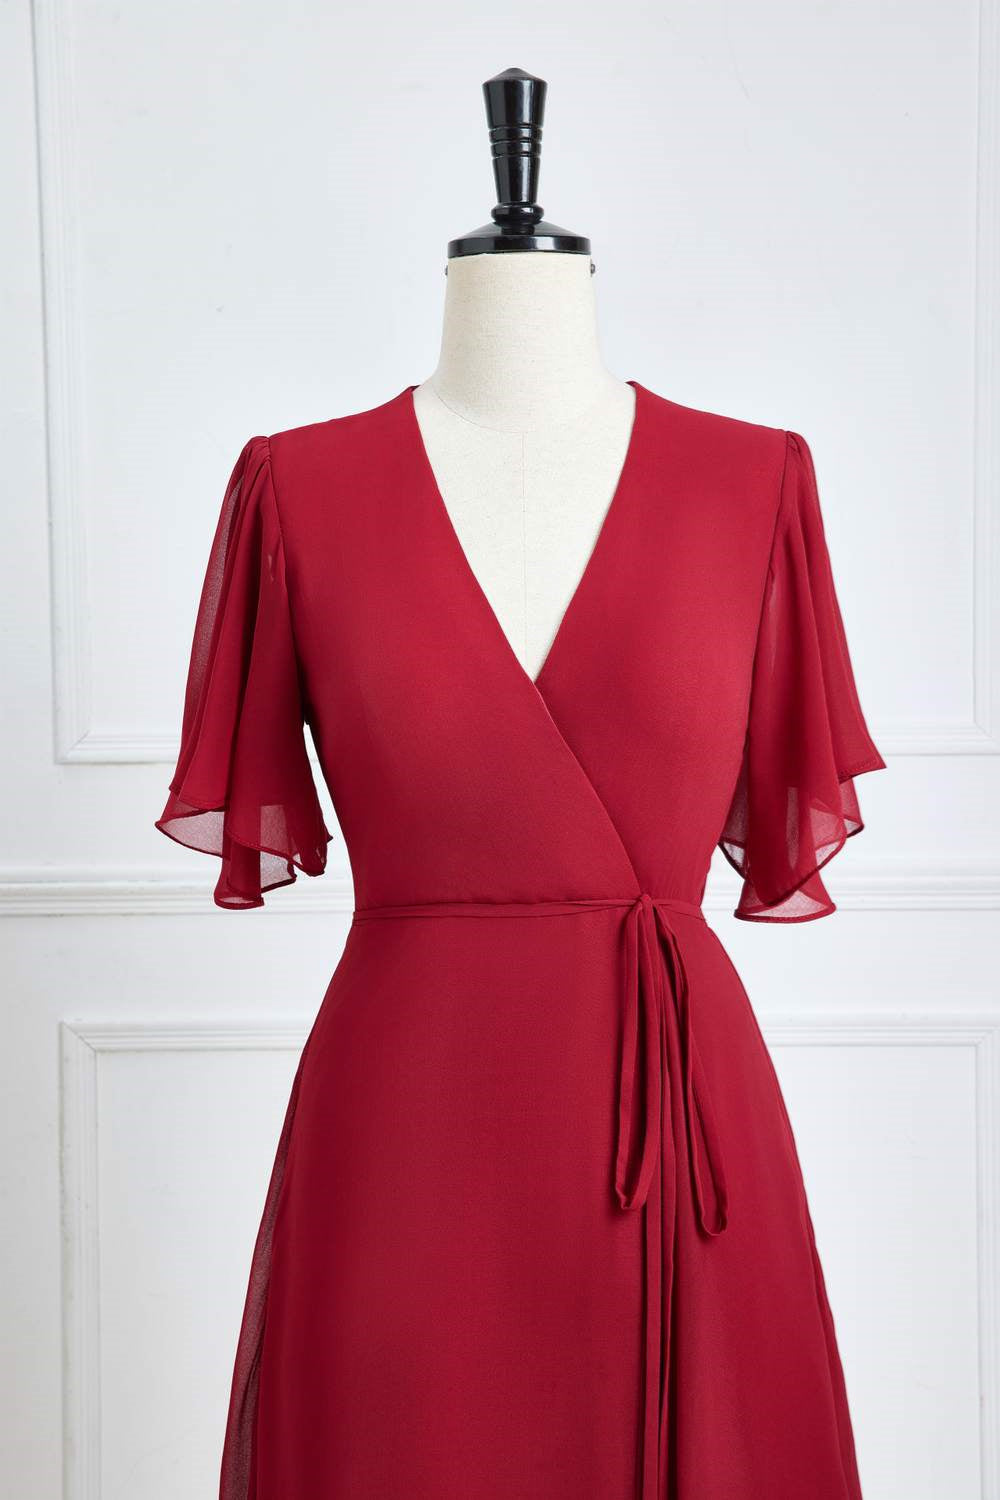 Wine Red Surplice Flaunt Sleeves A-line Long Bridesmaid Dress